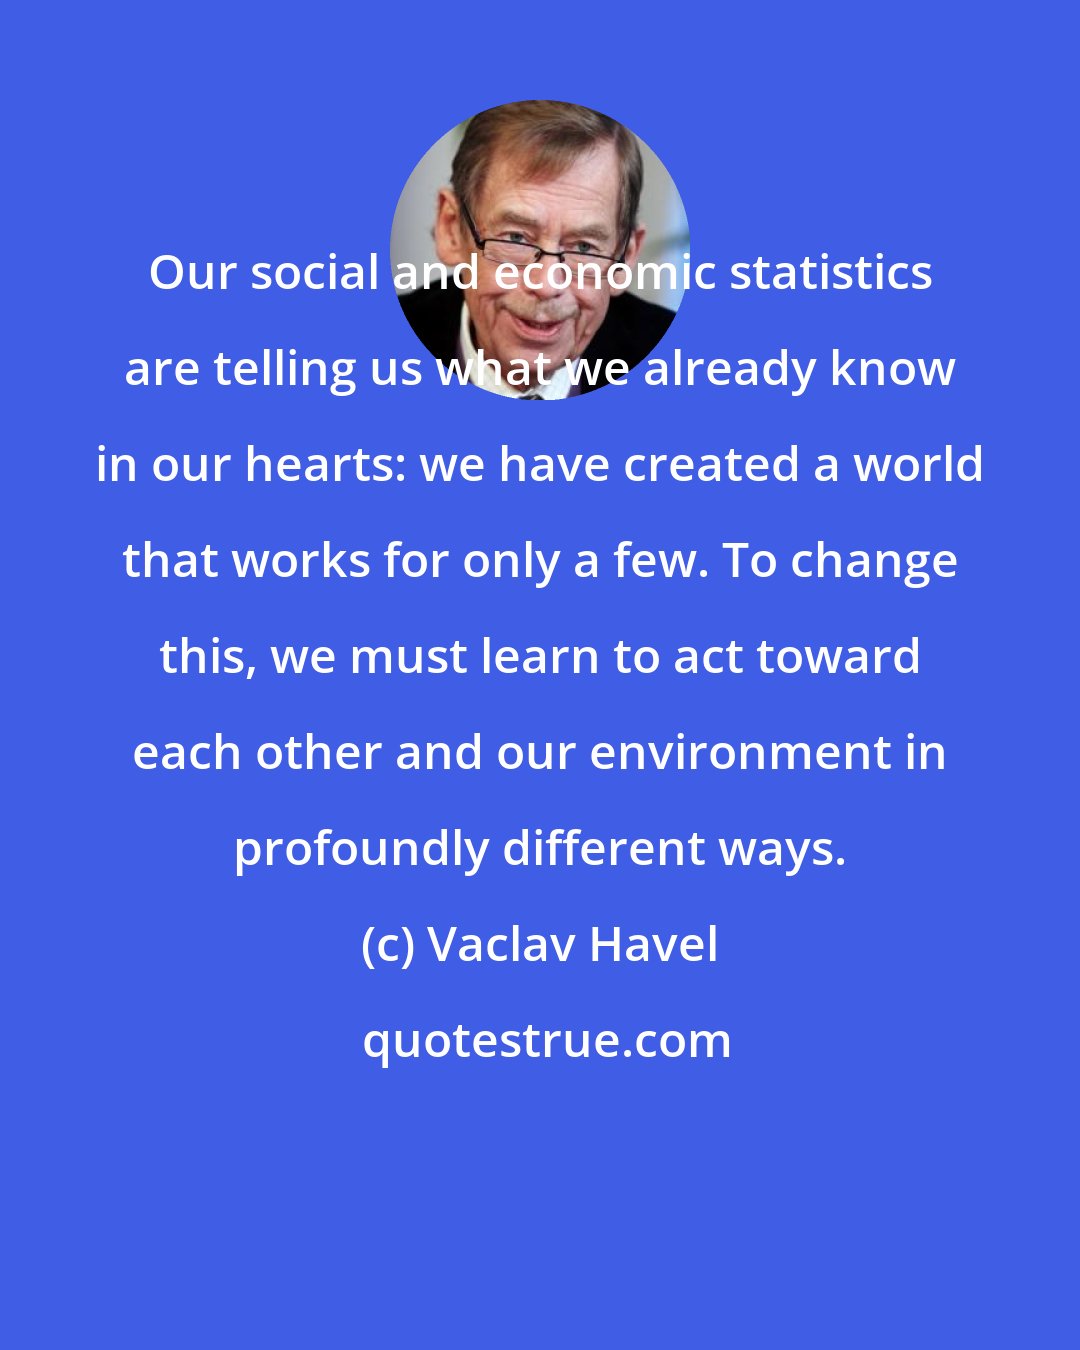 Vaclav Havel: Our social and economic statistics are telling us what we already know in our hearts: we have created a world that works for only a few. To change this, we must learn to act toward each other and our environment in profoundly different ways.